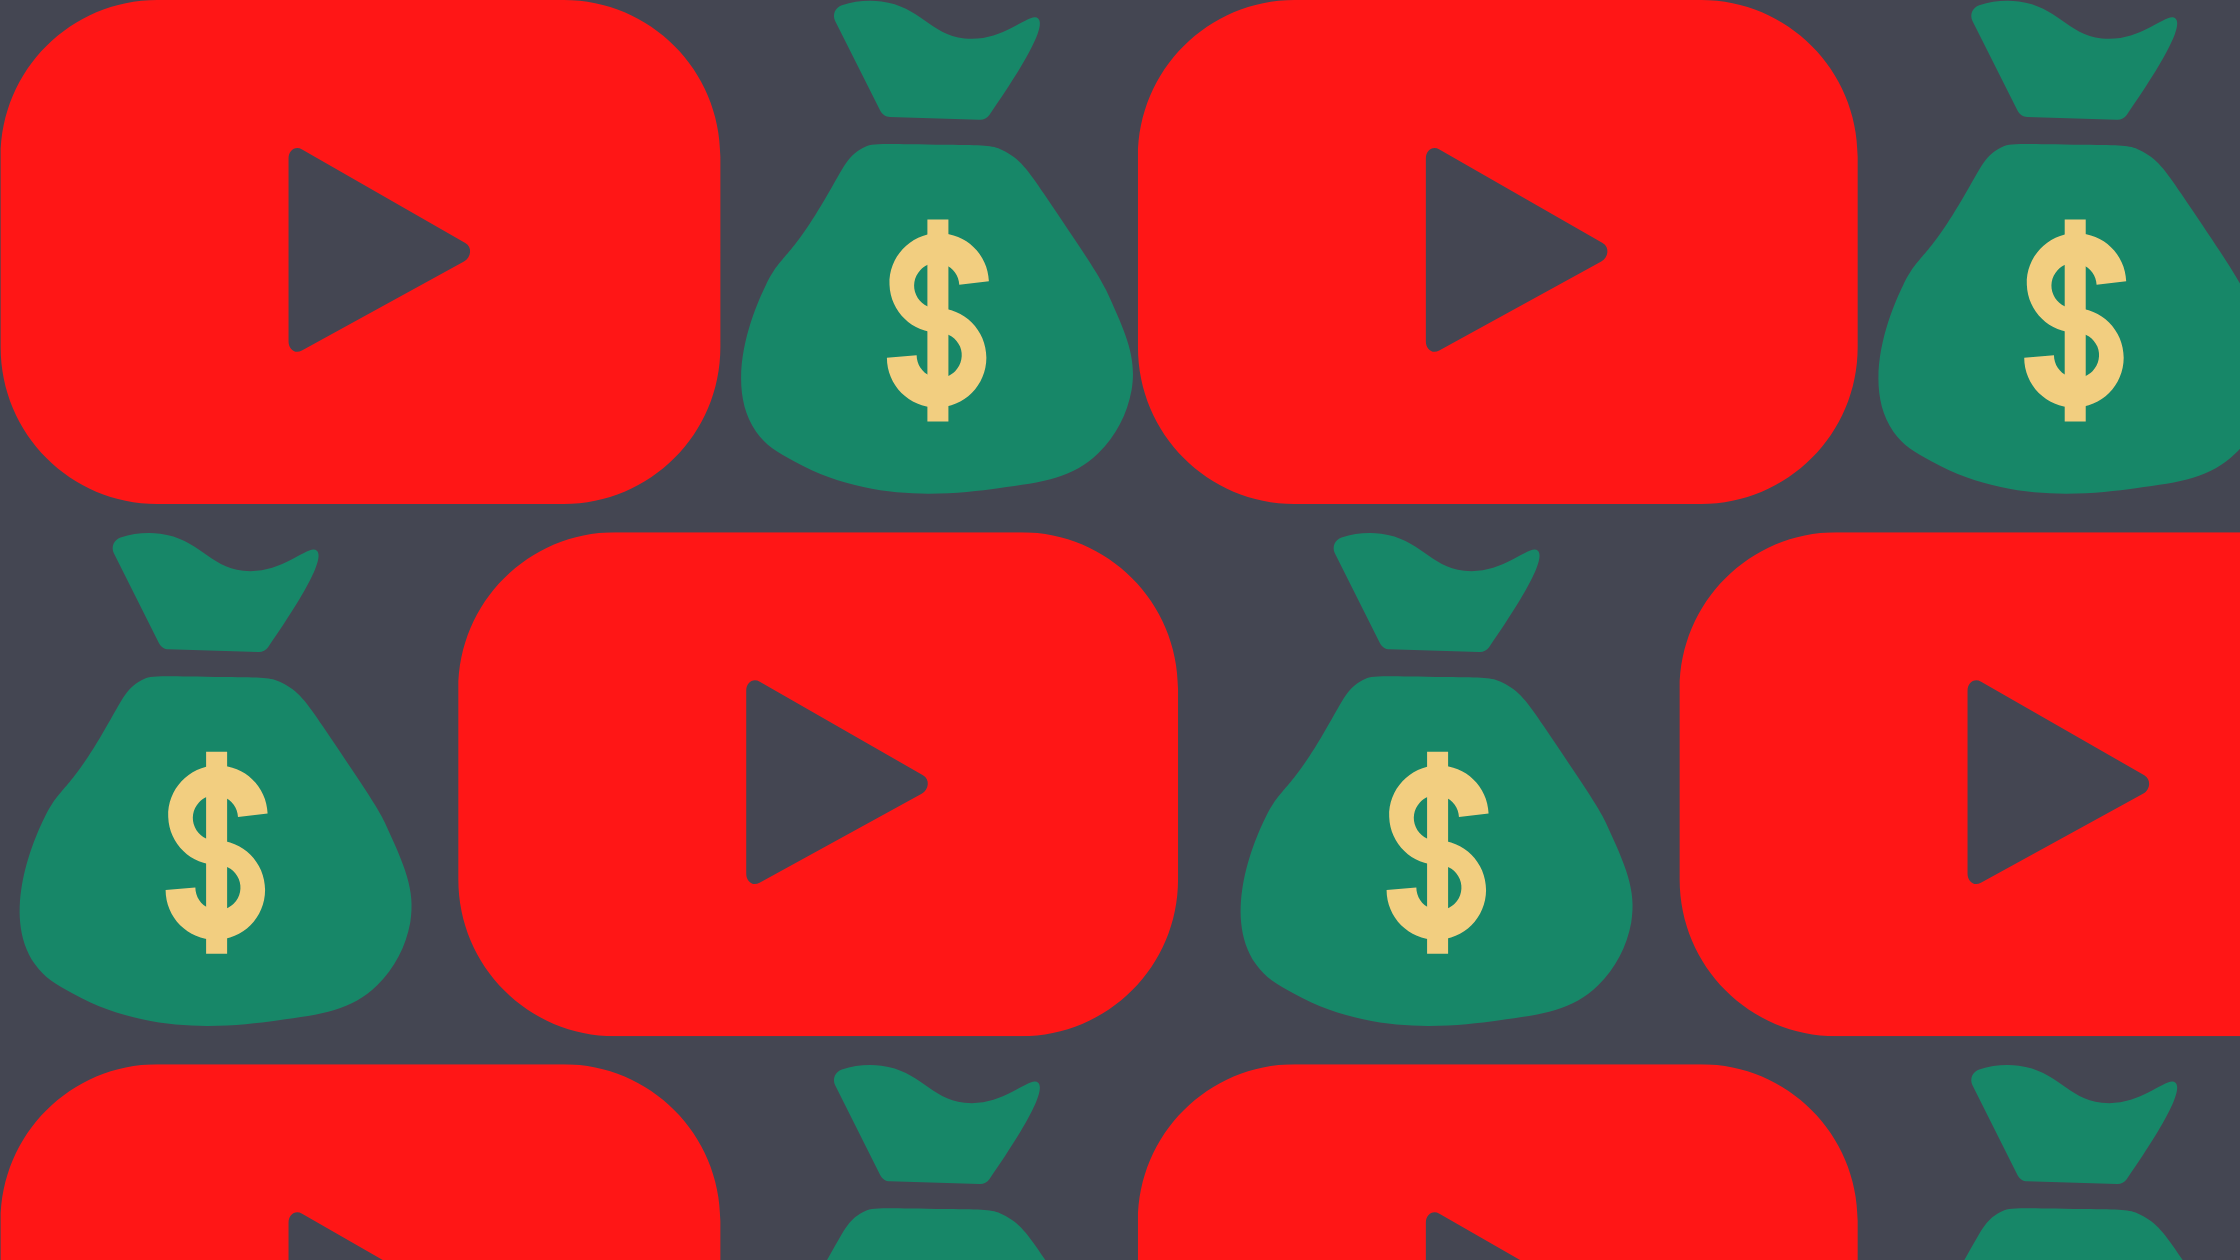 The YouTube logo and a sack of money in an alternating pattern